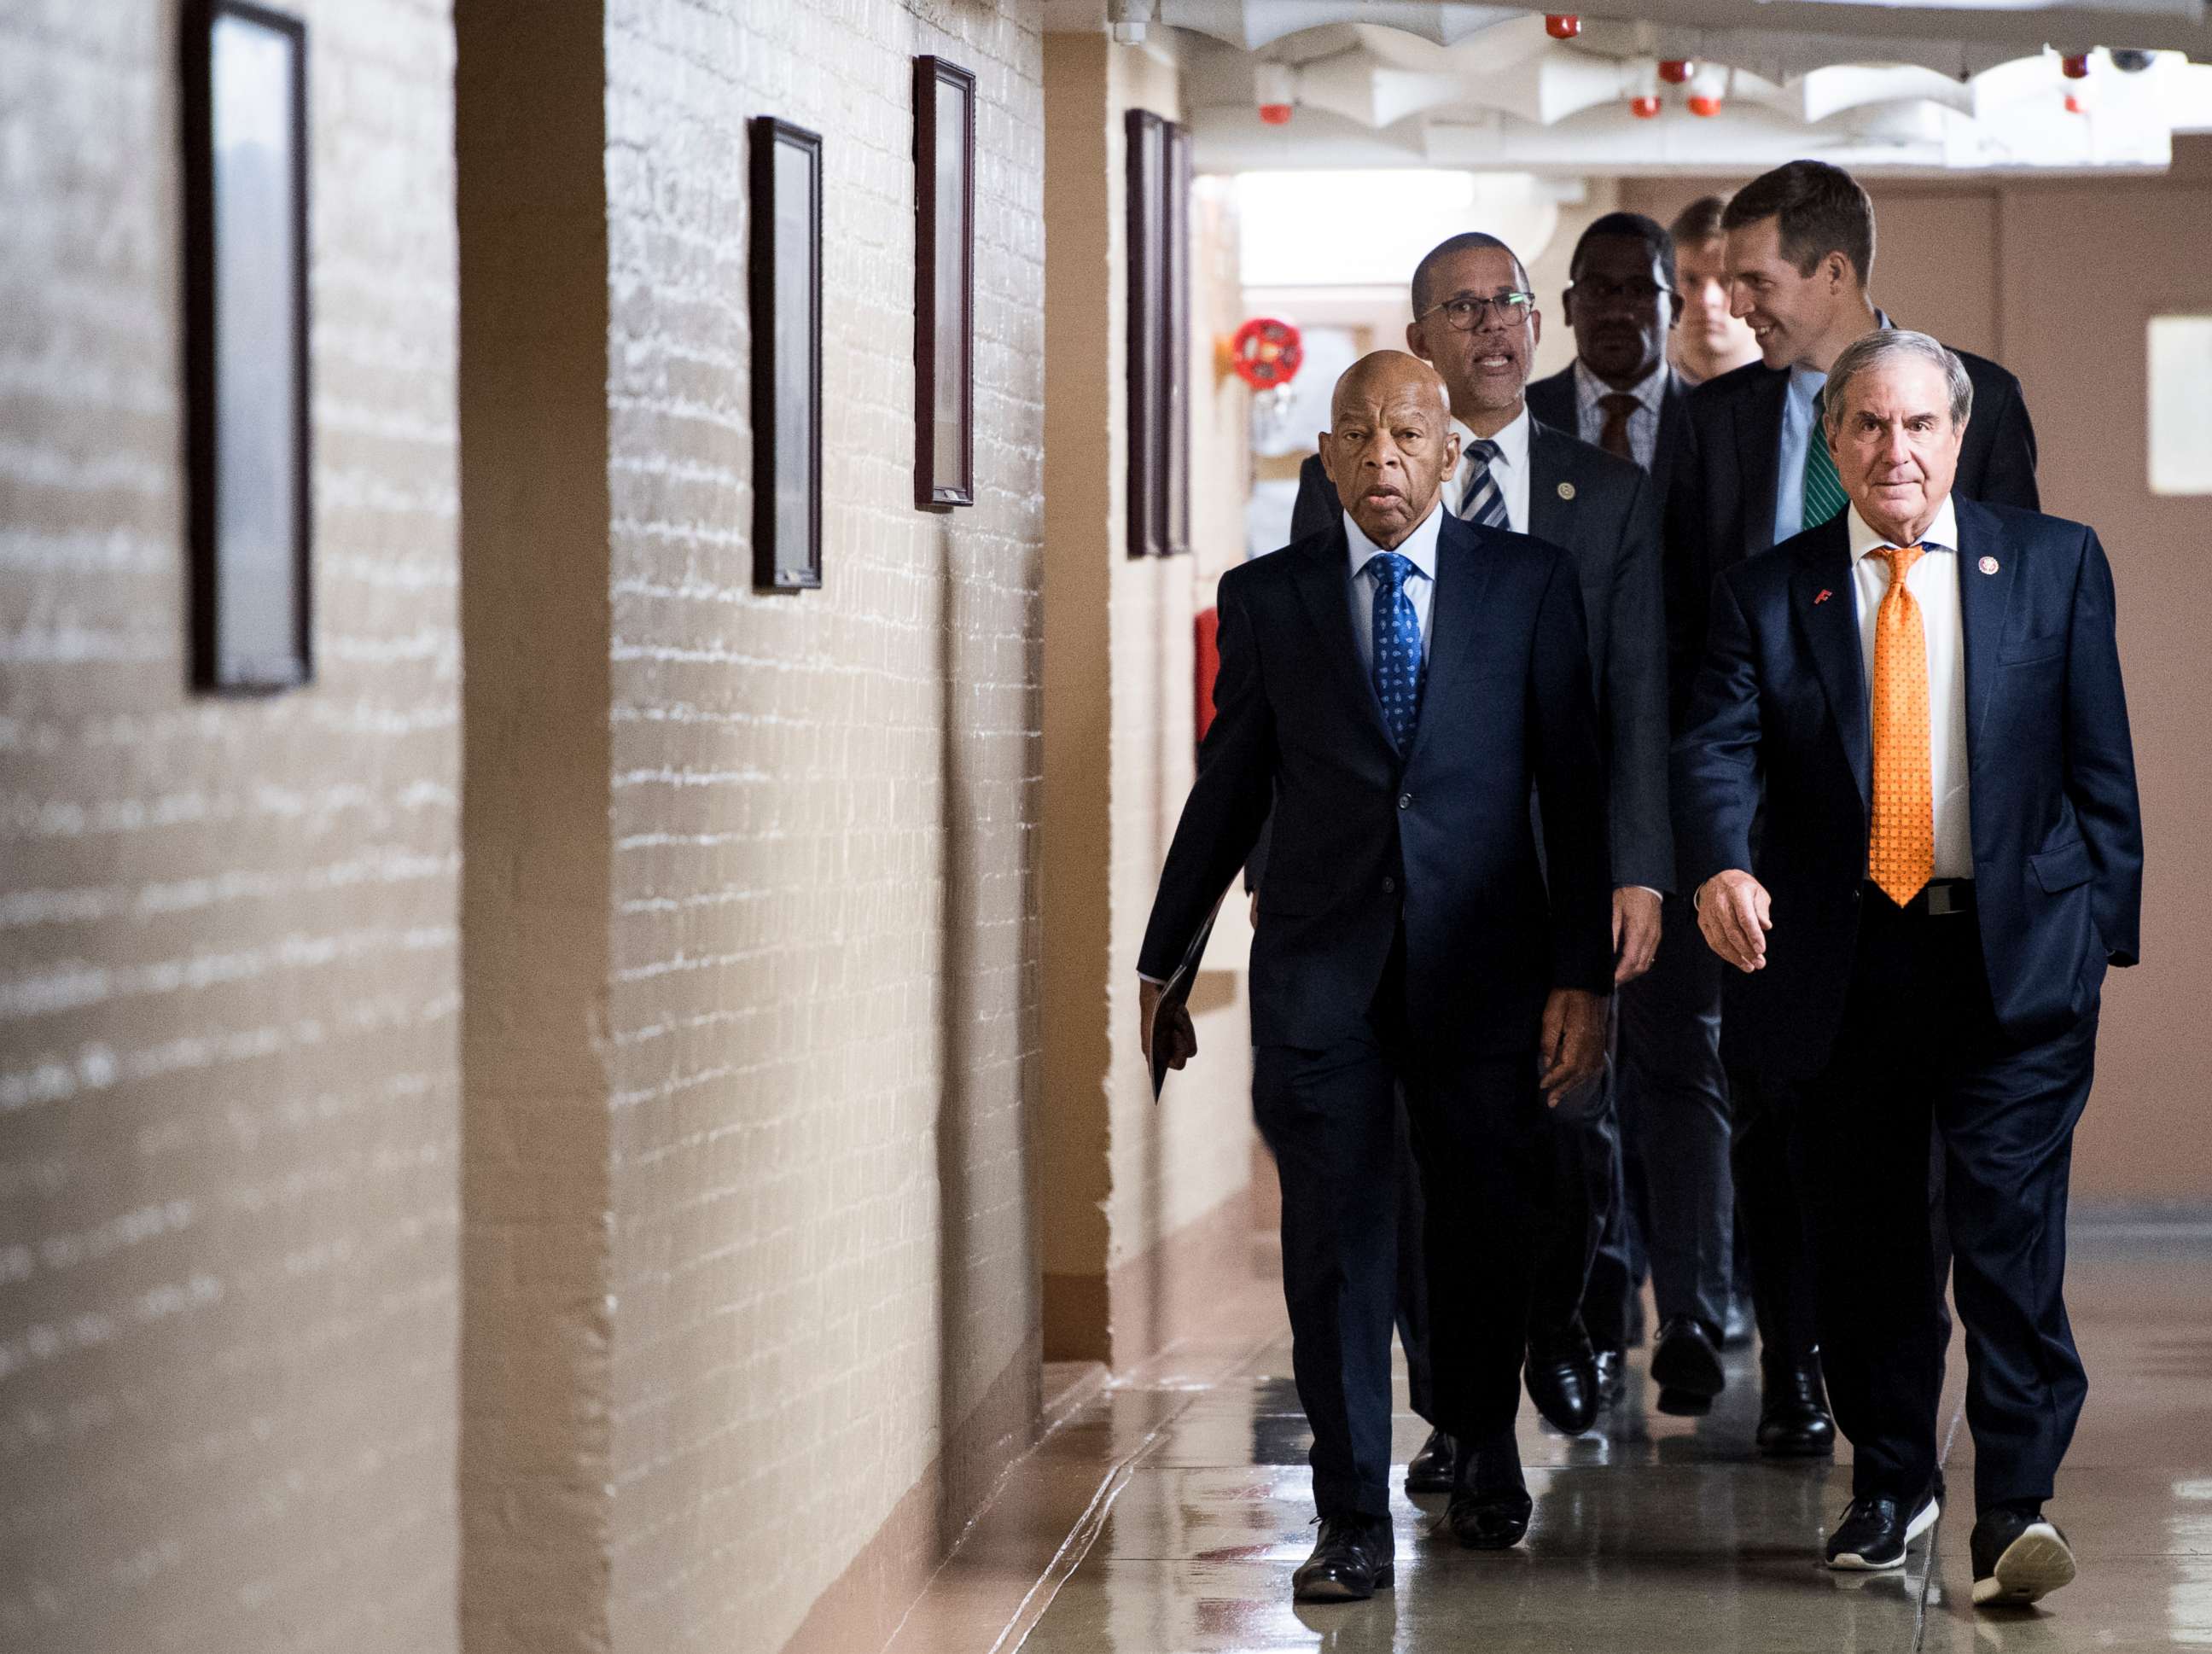 PHOTO: From left, Reps. John Lewis, D-Ga., Anthony Brown, D-Md., Conor Lamb, D-Pa., and John Yarmuth, D-Ky., arrive for the House Democrats caucus meeting in the Capitol on impeachment of President Trump on Tuesday, Sept. 24, 2019.